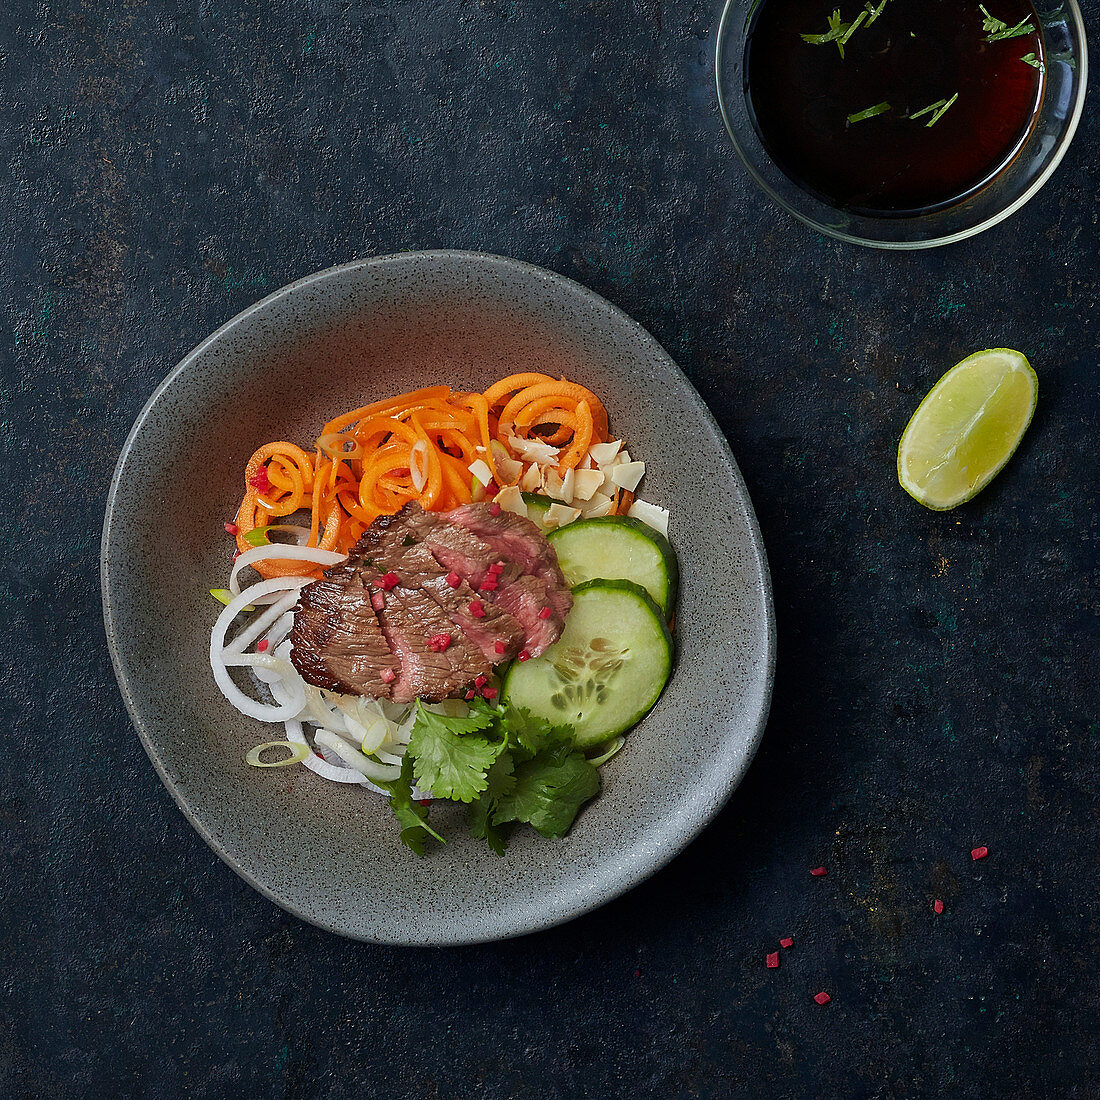 A slice of roast beef on vegetable noodles and cucumber slices